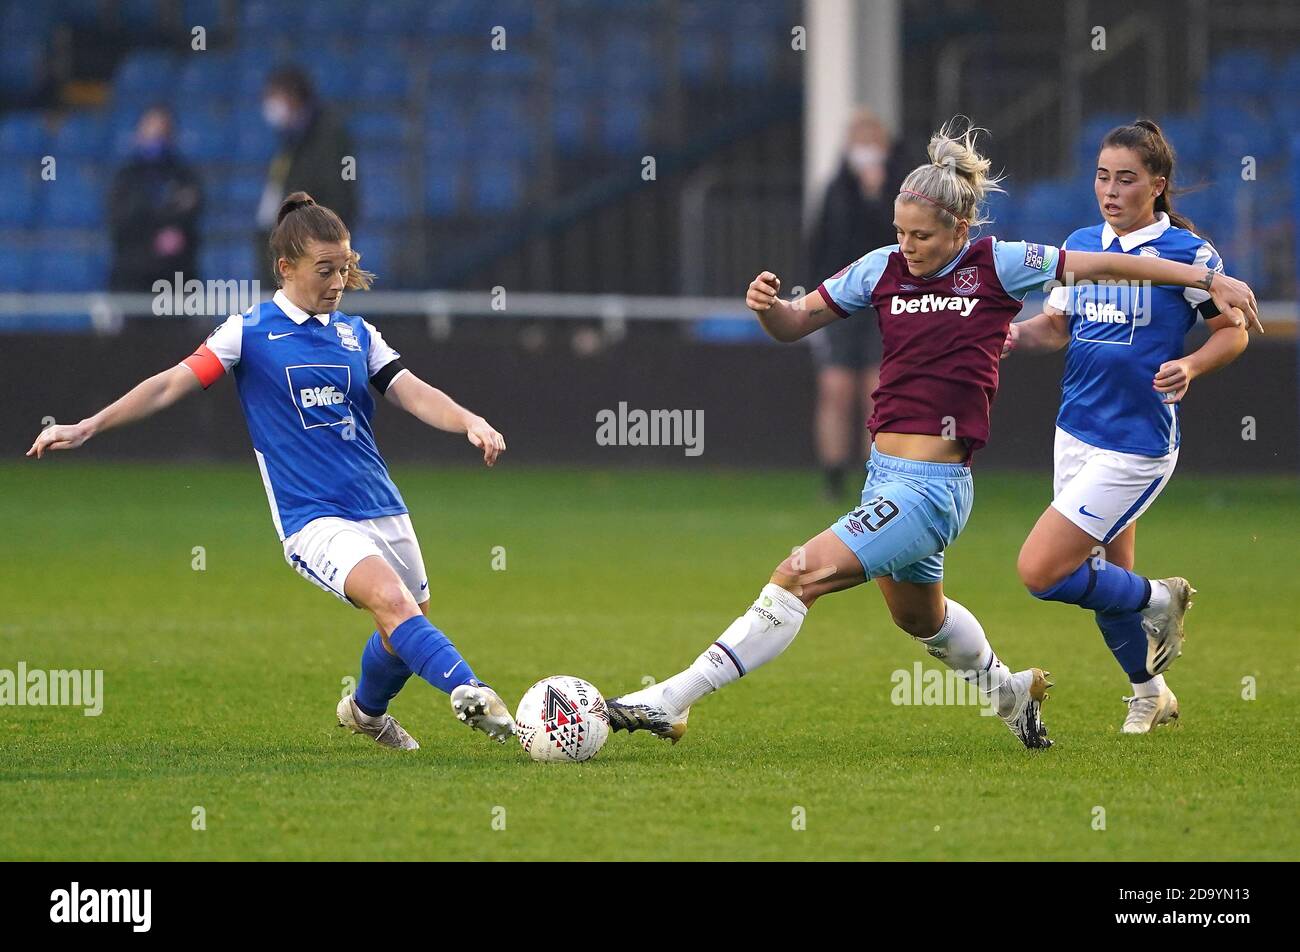 Birmingham City's Christie Murray (left) and West Ham United's Rachel Daly battle for the ball during the FA Women's Super League match at the SportNation.bet Stadium, Solihull. Stock Photo